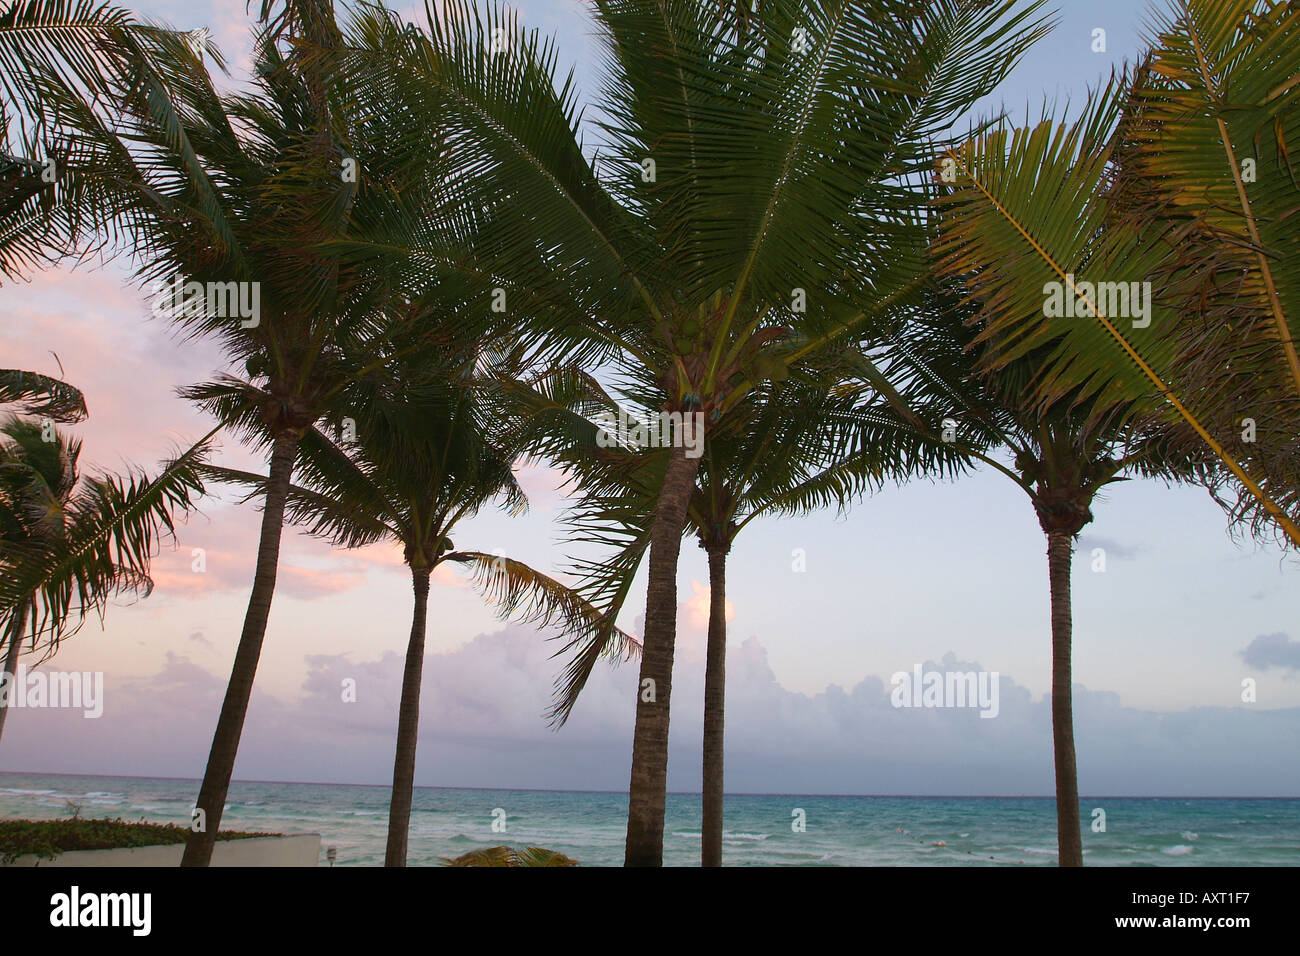 Playa Del Carmen Palm trees with coconuts and sunset on beach Stock Photo